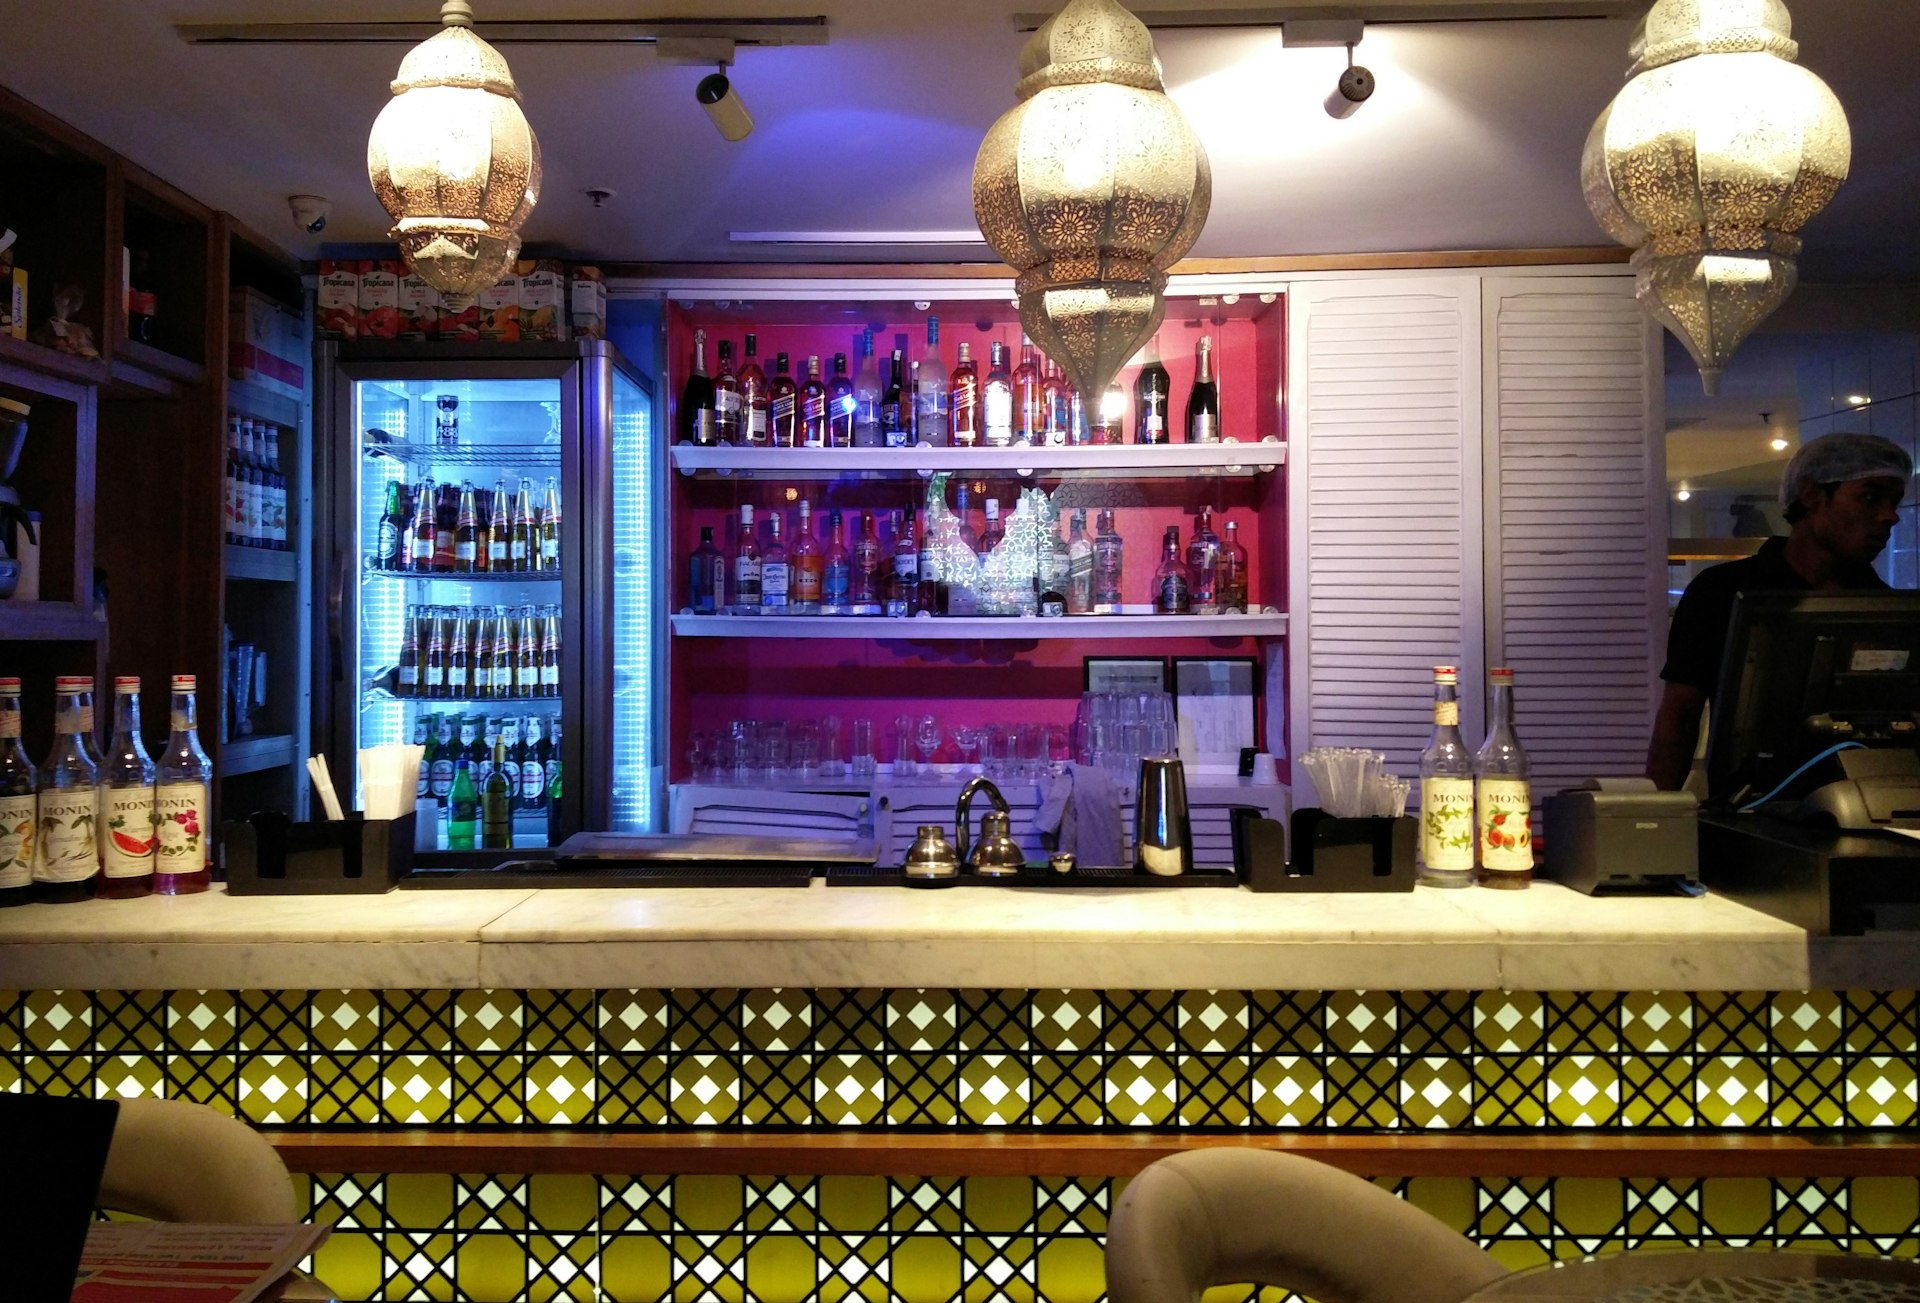 Modern Lebanese themes, and a hint of Rick's Cafe, at Zizo © Puneetinder Kaur Sidhu / Lonely Planet